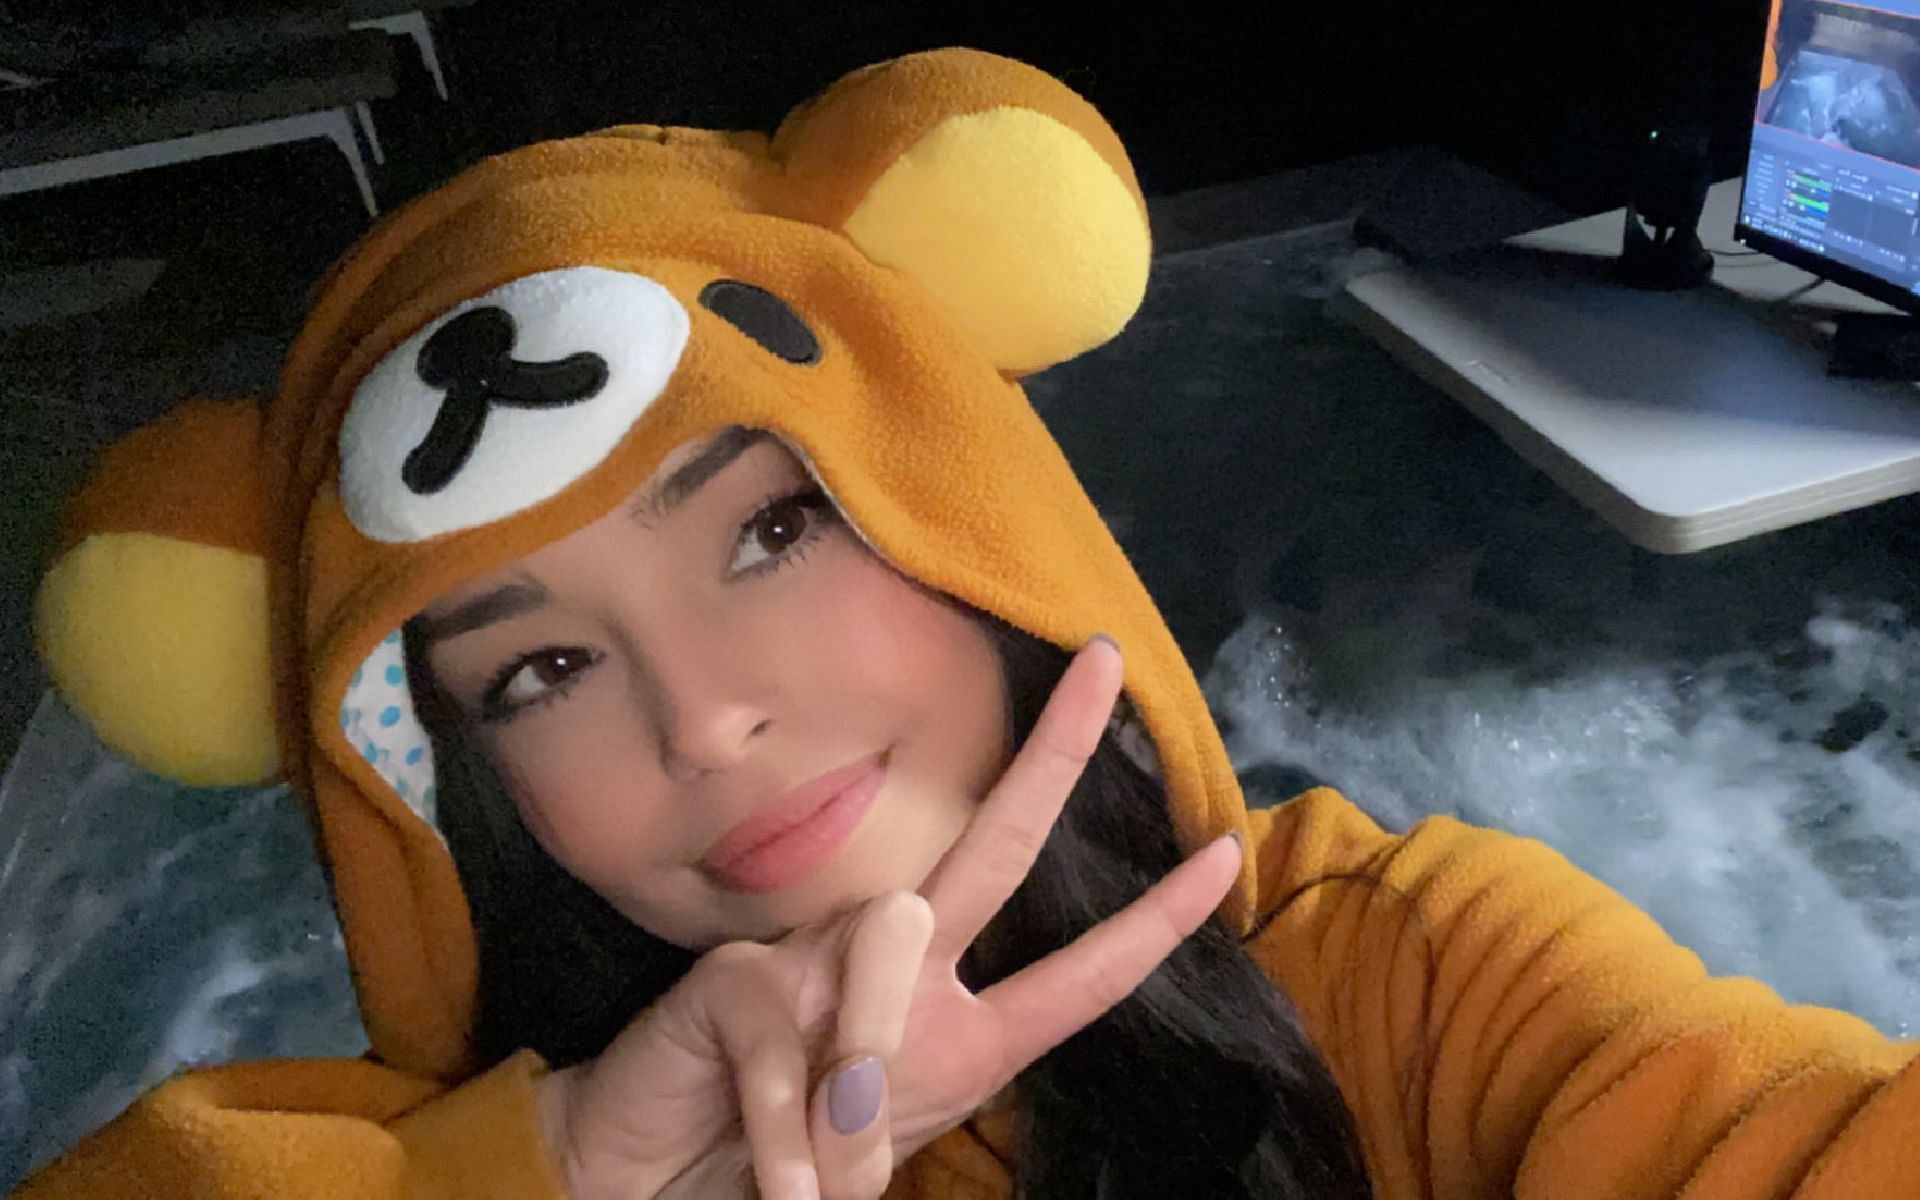 Valkyrae talked about being a &quot;mega stoner&quot; on stream (Image via Twitter/Valkyrae)